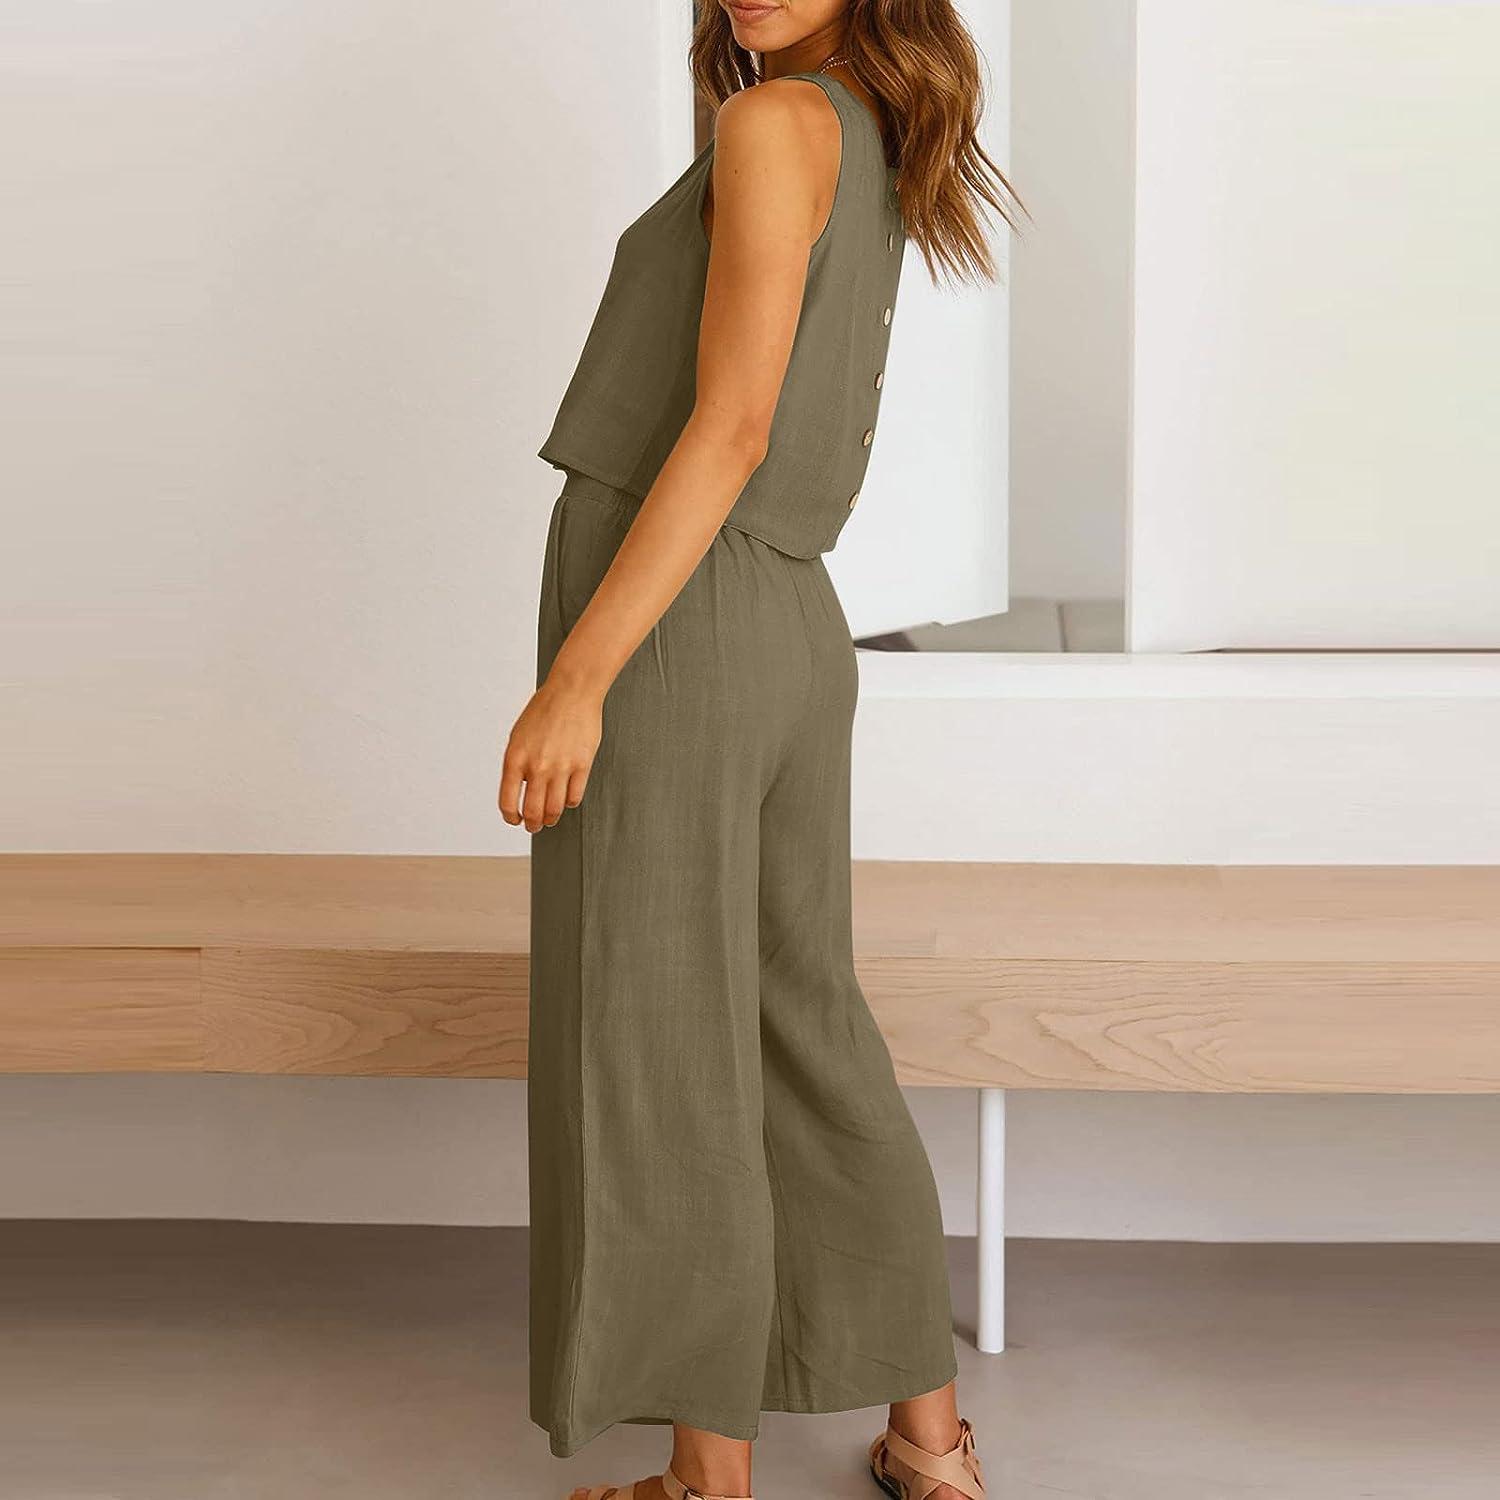 Two Piece Sets for Women Summer Casual Solid Color Set Sleeveless Round  Neck Crop Top Wide Leg Capri Pants with Pocket Khaki Medium